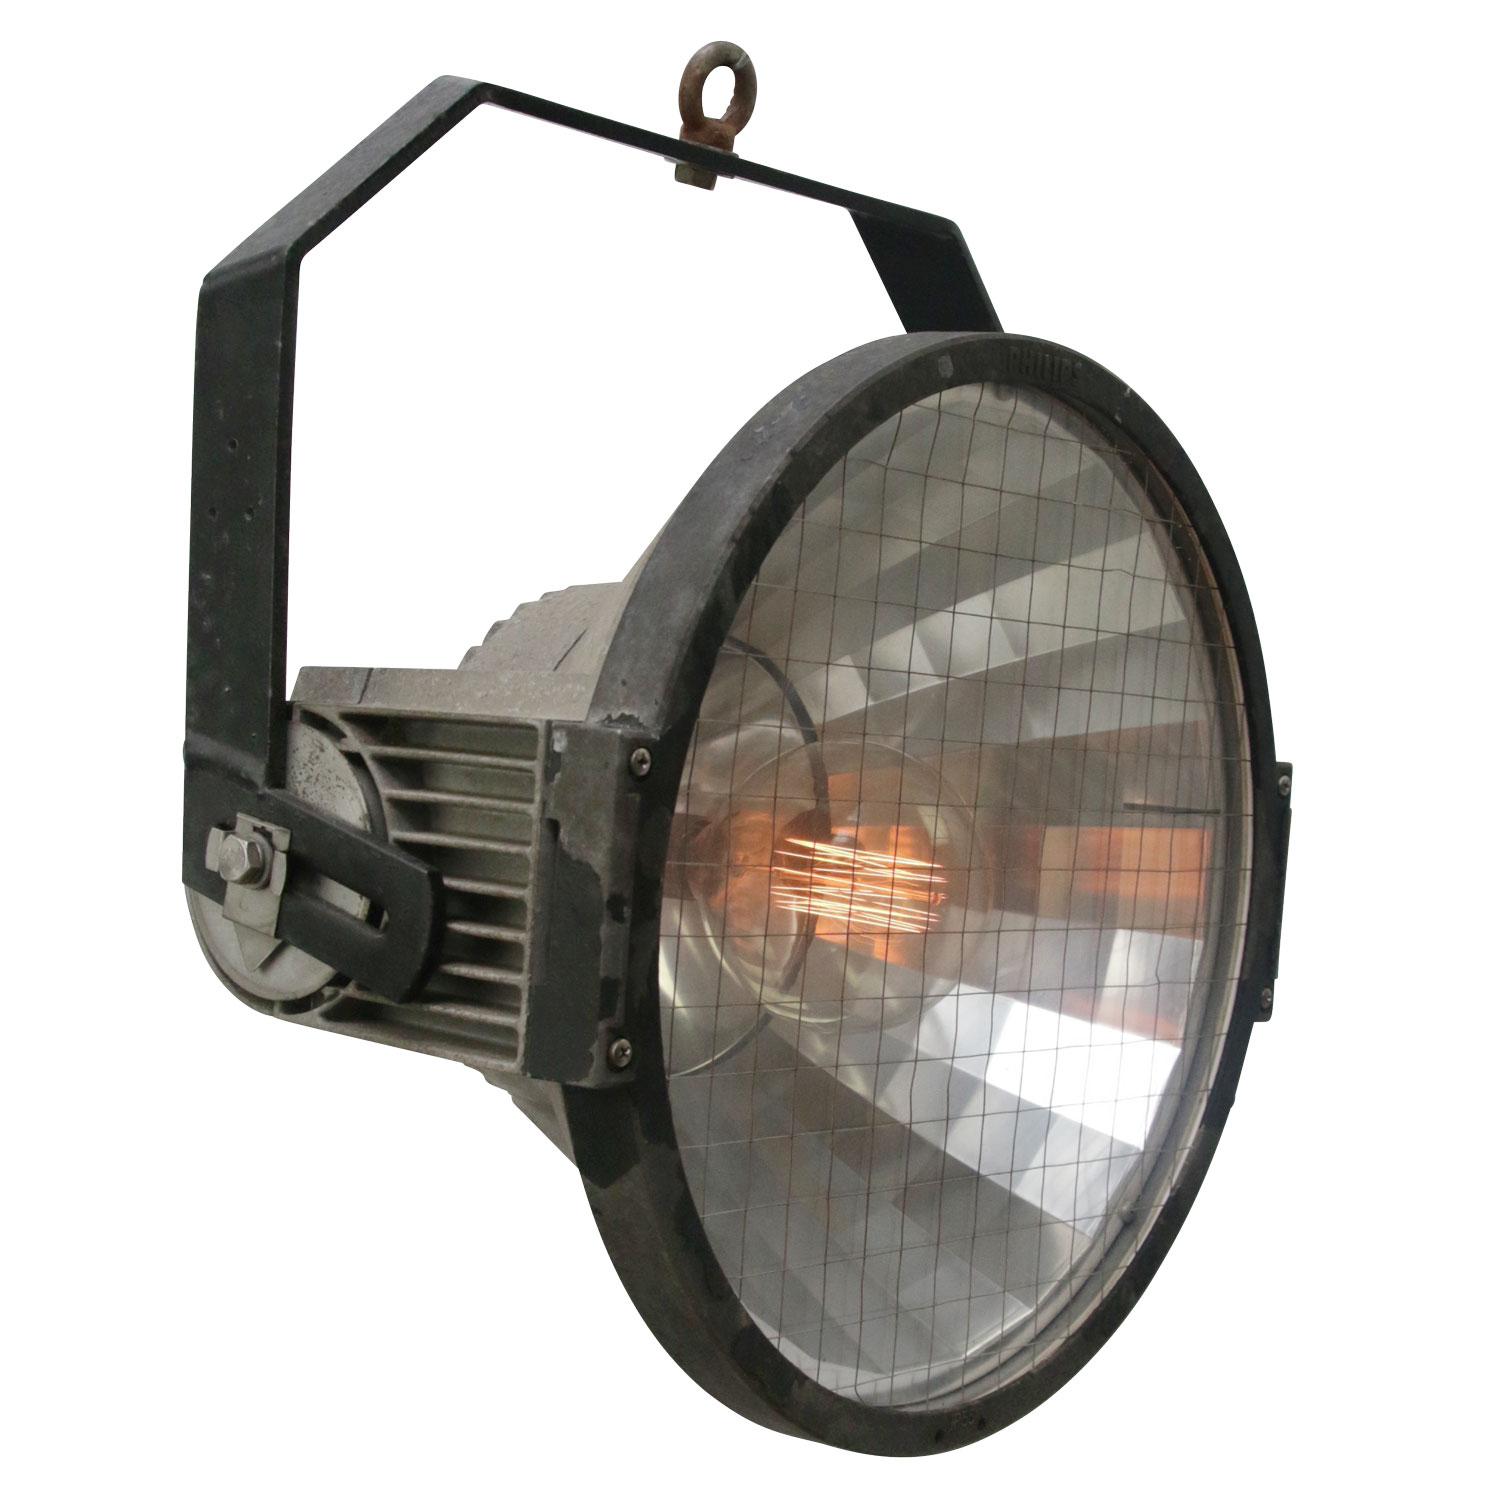 Field light. Stadium lamp from Amsterdam arena.
Cast aluminum with clear glass.

Weight: 11.2 kg / 24.7 lb.

Priced per individual item. All lamps have been made suitable by international standards for incandescent light bulbs, energy-efficient and